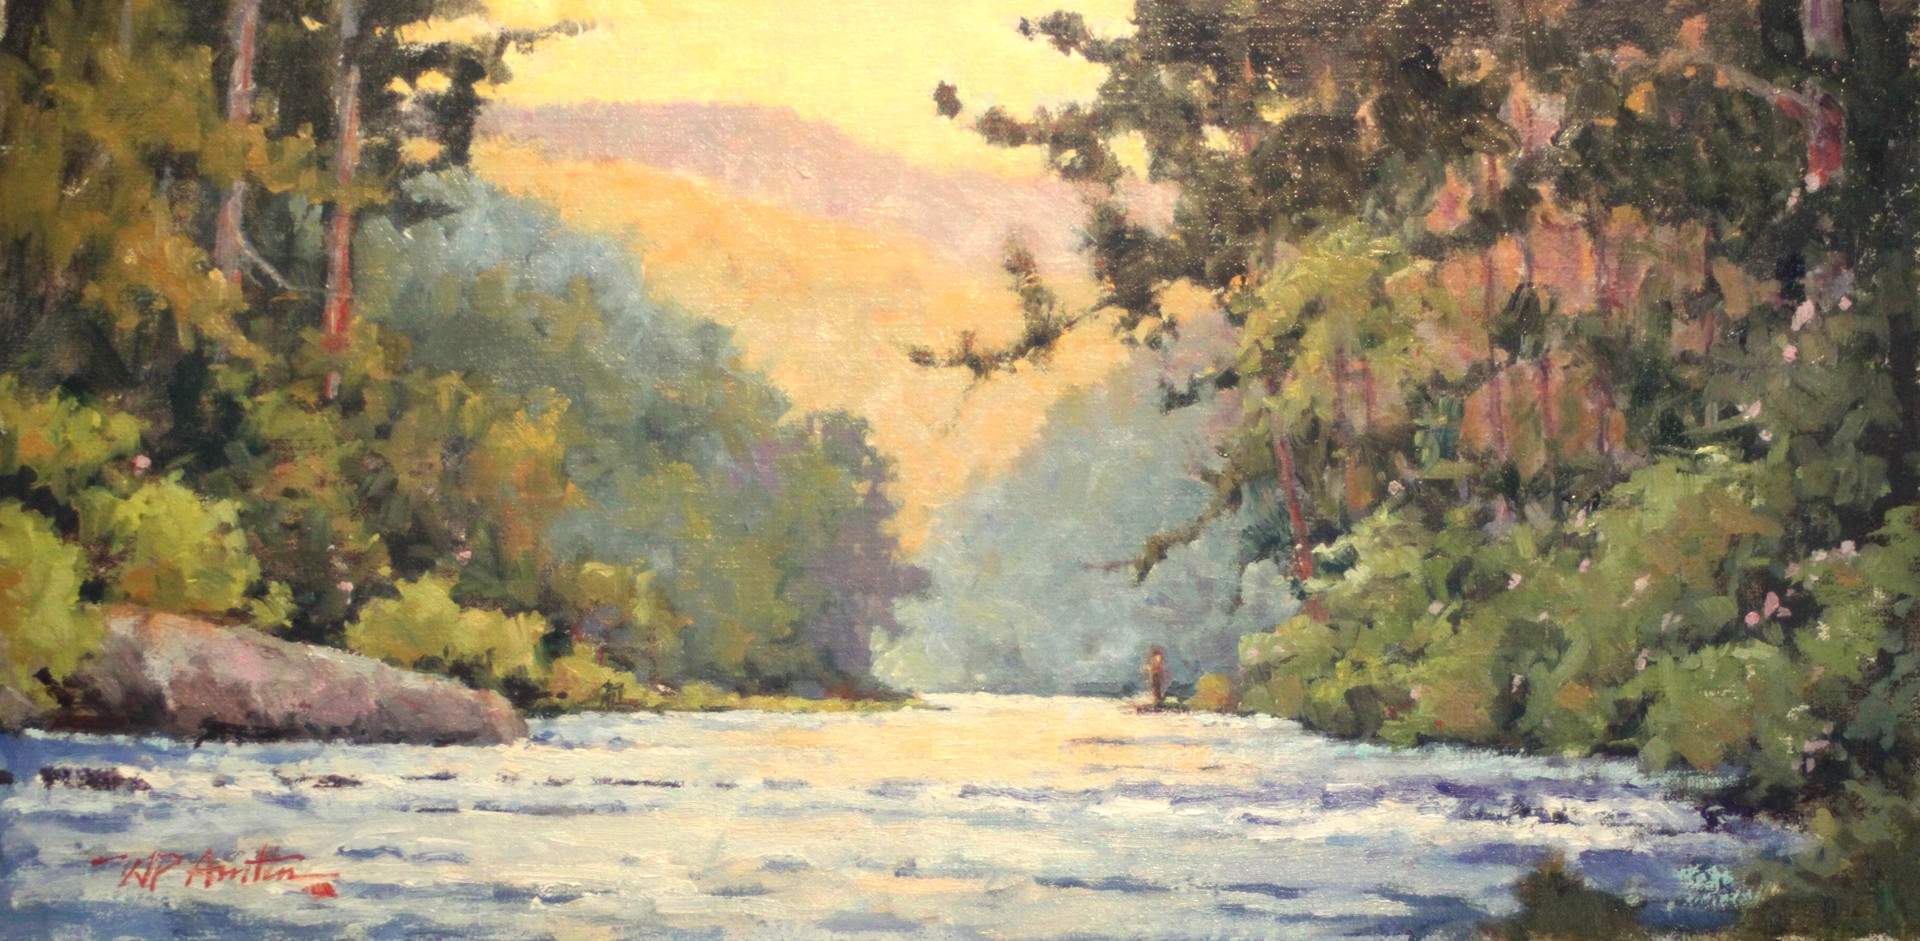 Chattooga Eve by Perry Austin